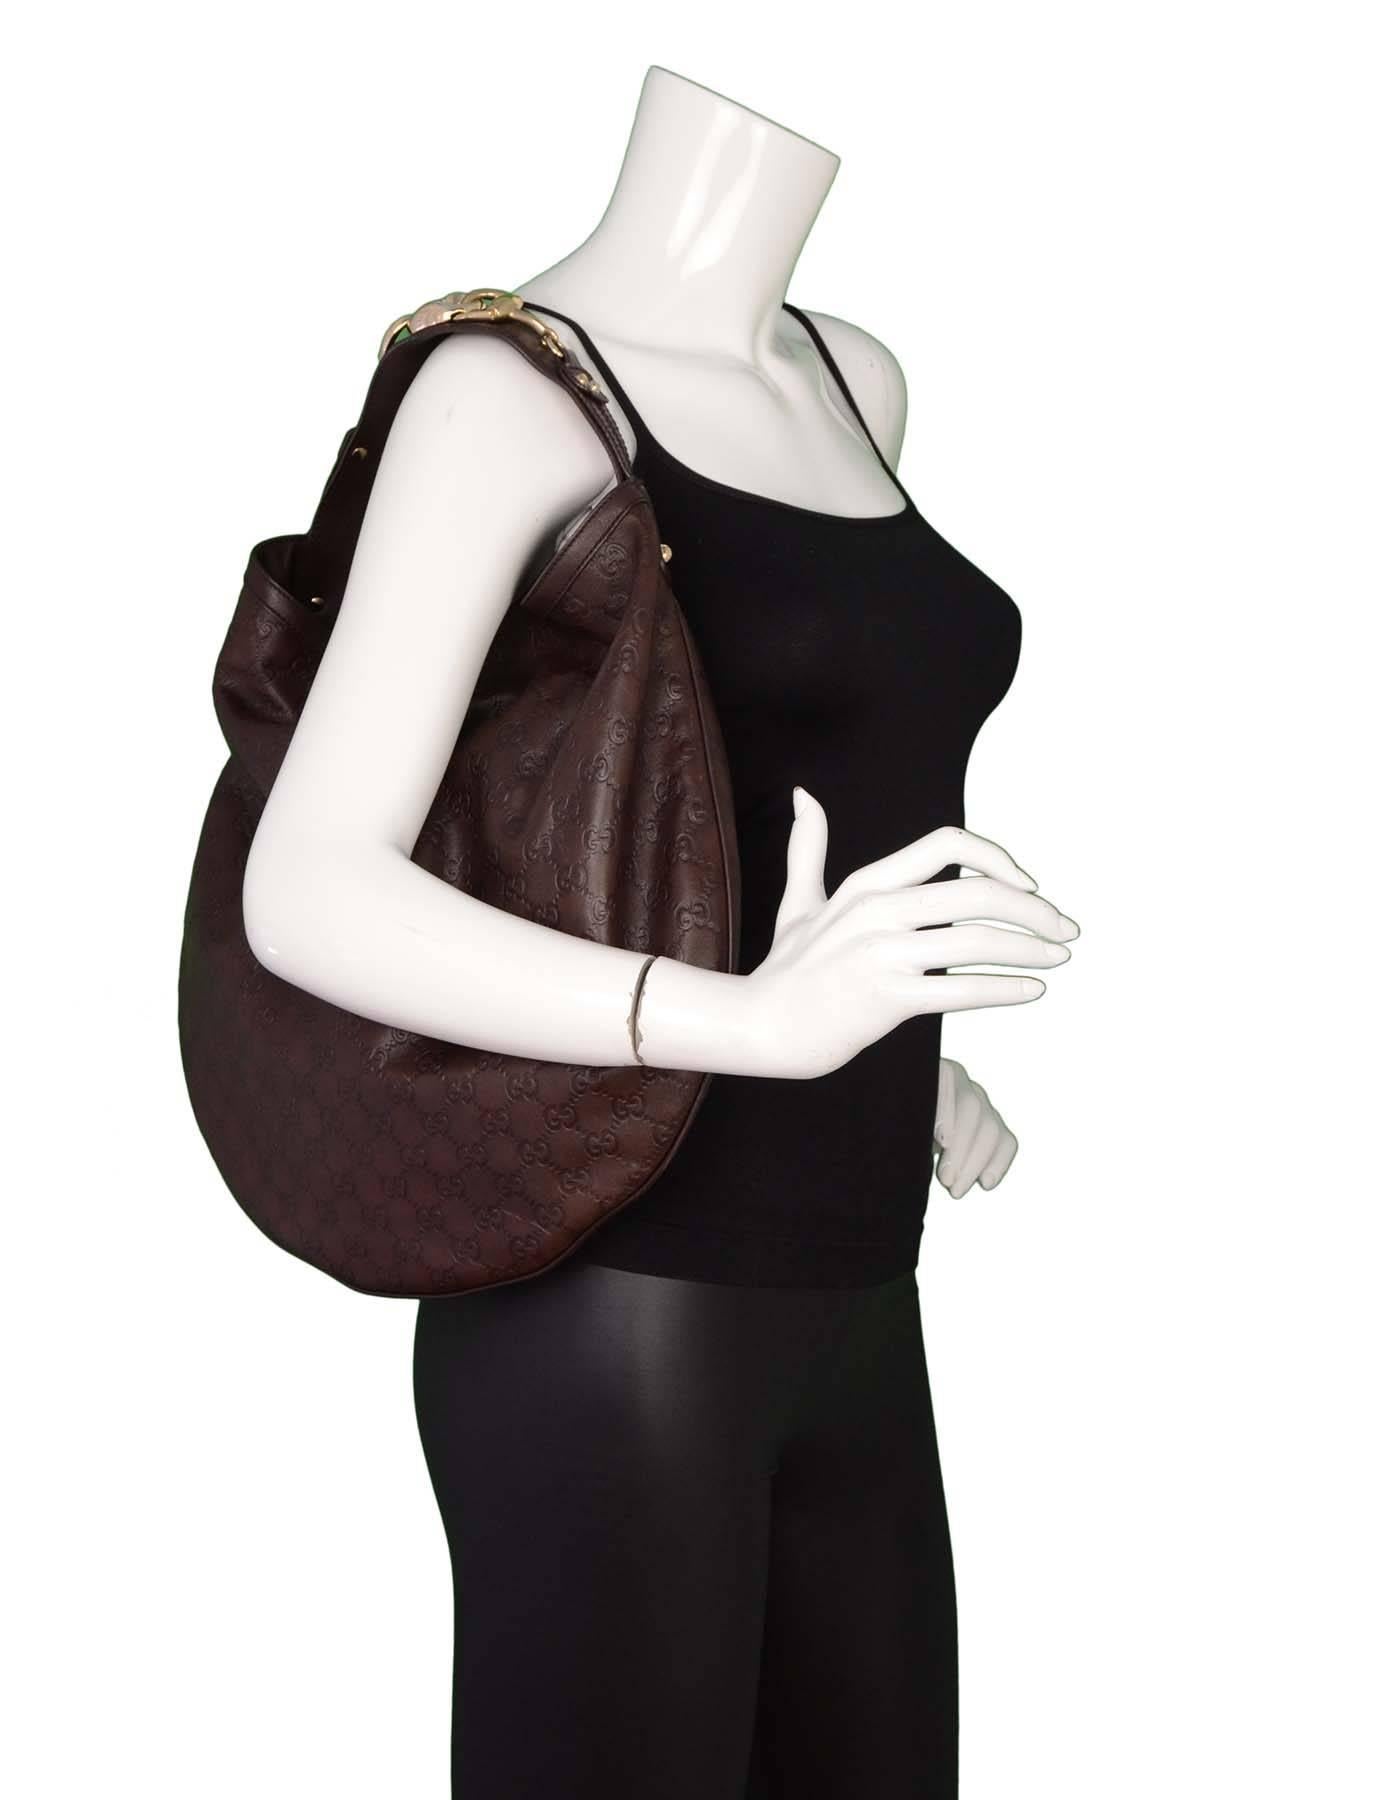 Gucci Brown Embossed Guccissima Leather Hobo

Features monogrammed embossed GG logo throughout and horsbit detail at shoulder strap

Made In: Italy
Color: Brown and gold
Hardware: Goldtone
Materials: Leather and metal
Lining: Ivory, burgundy